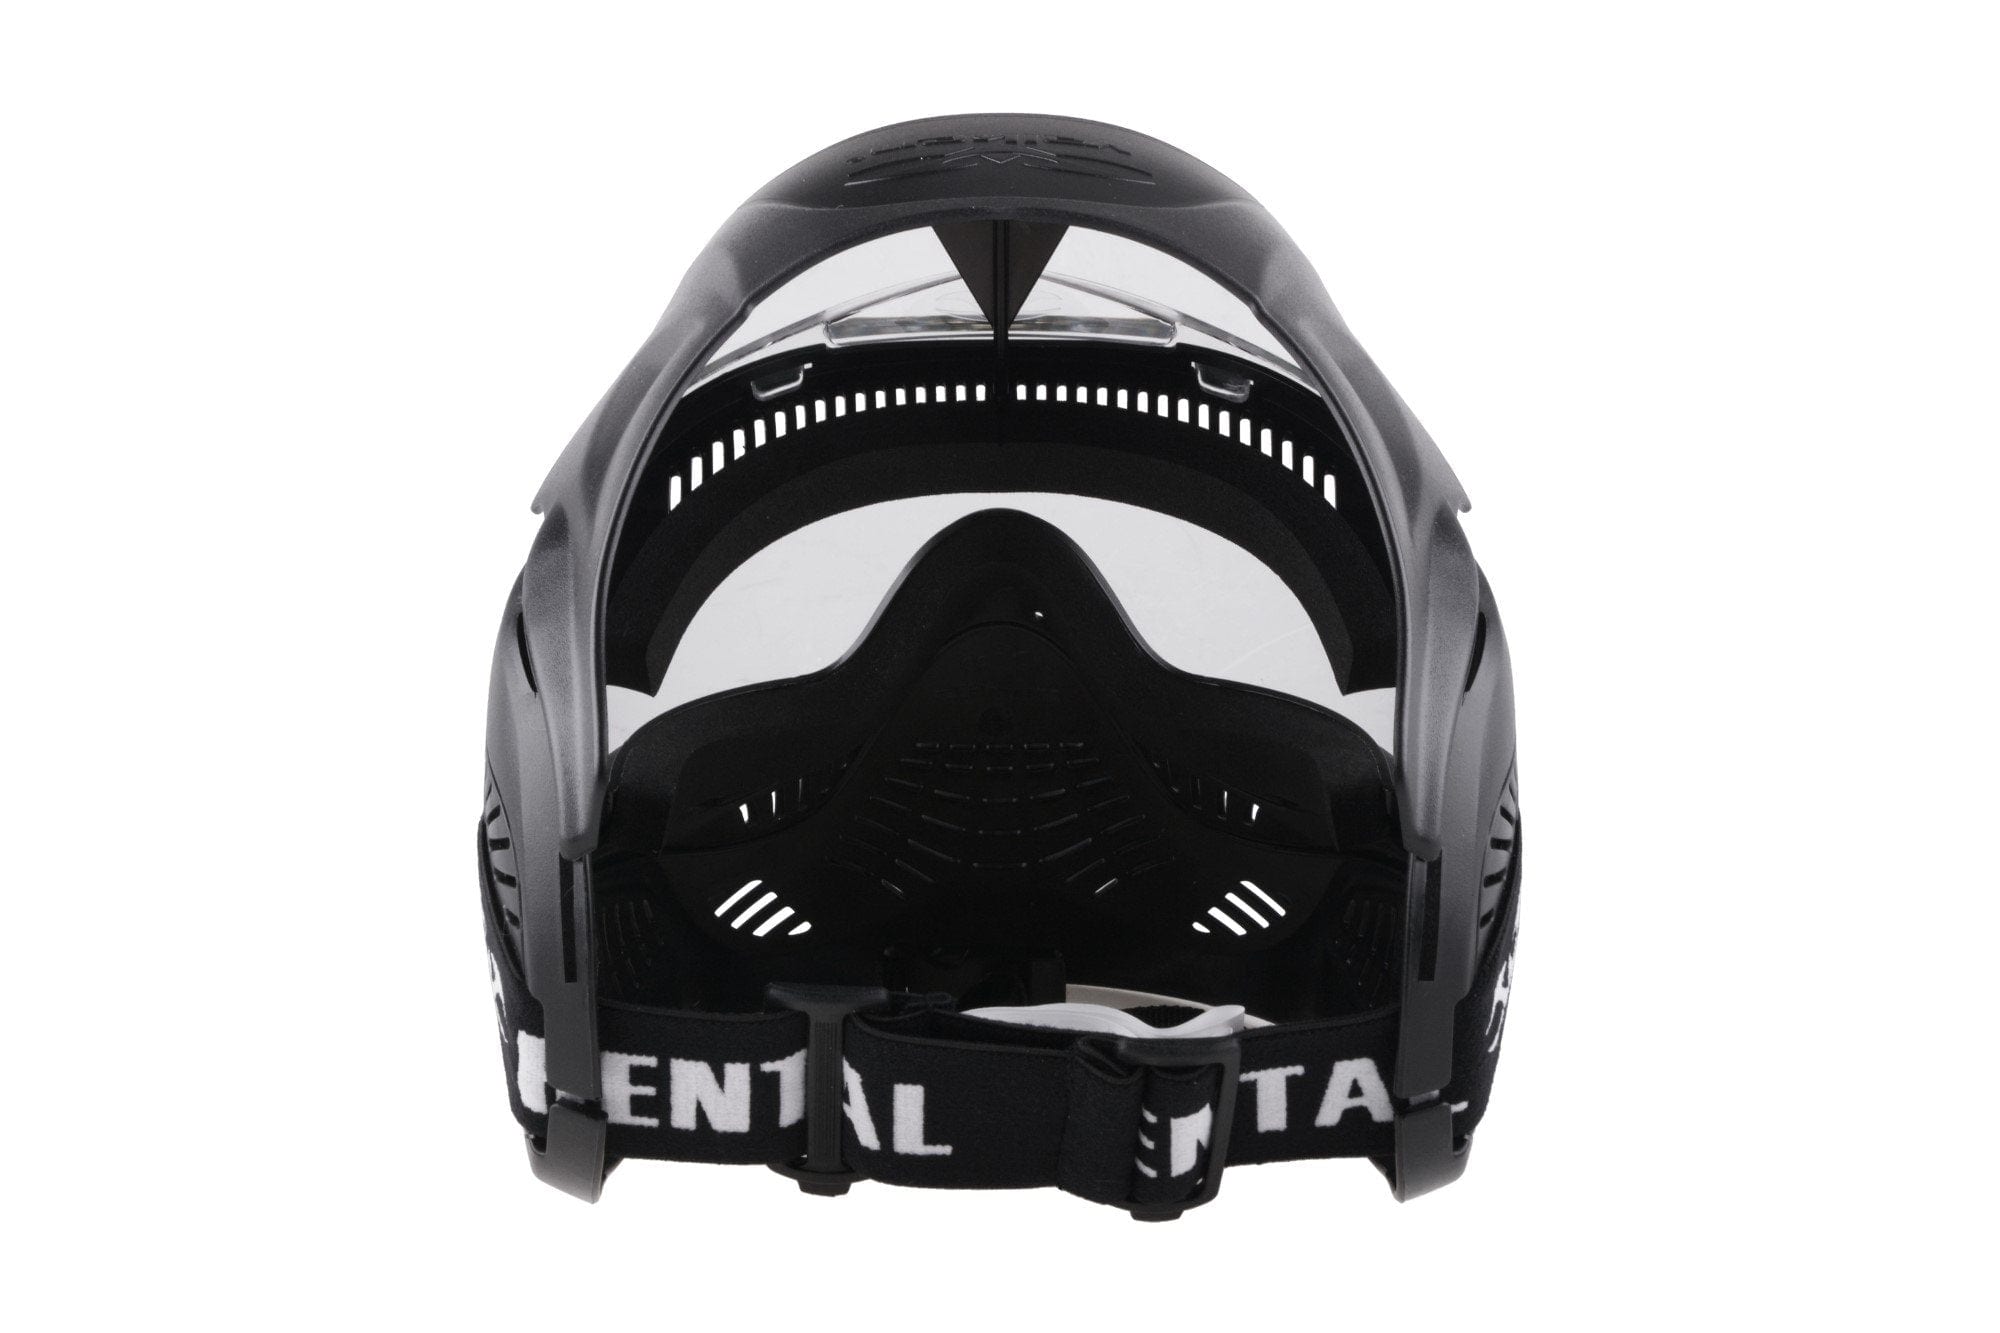 Annex MI-3 Thermal Protective Mask Field by Valken on Airsoft Mania Europe